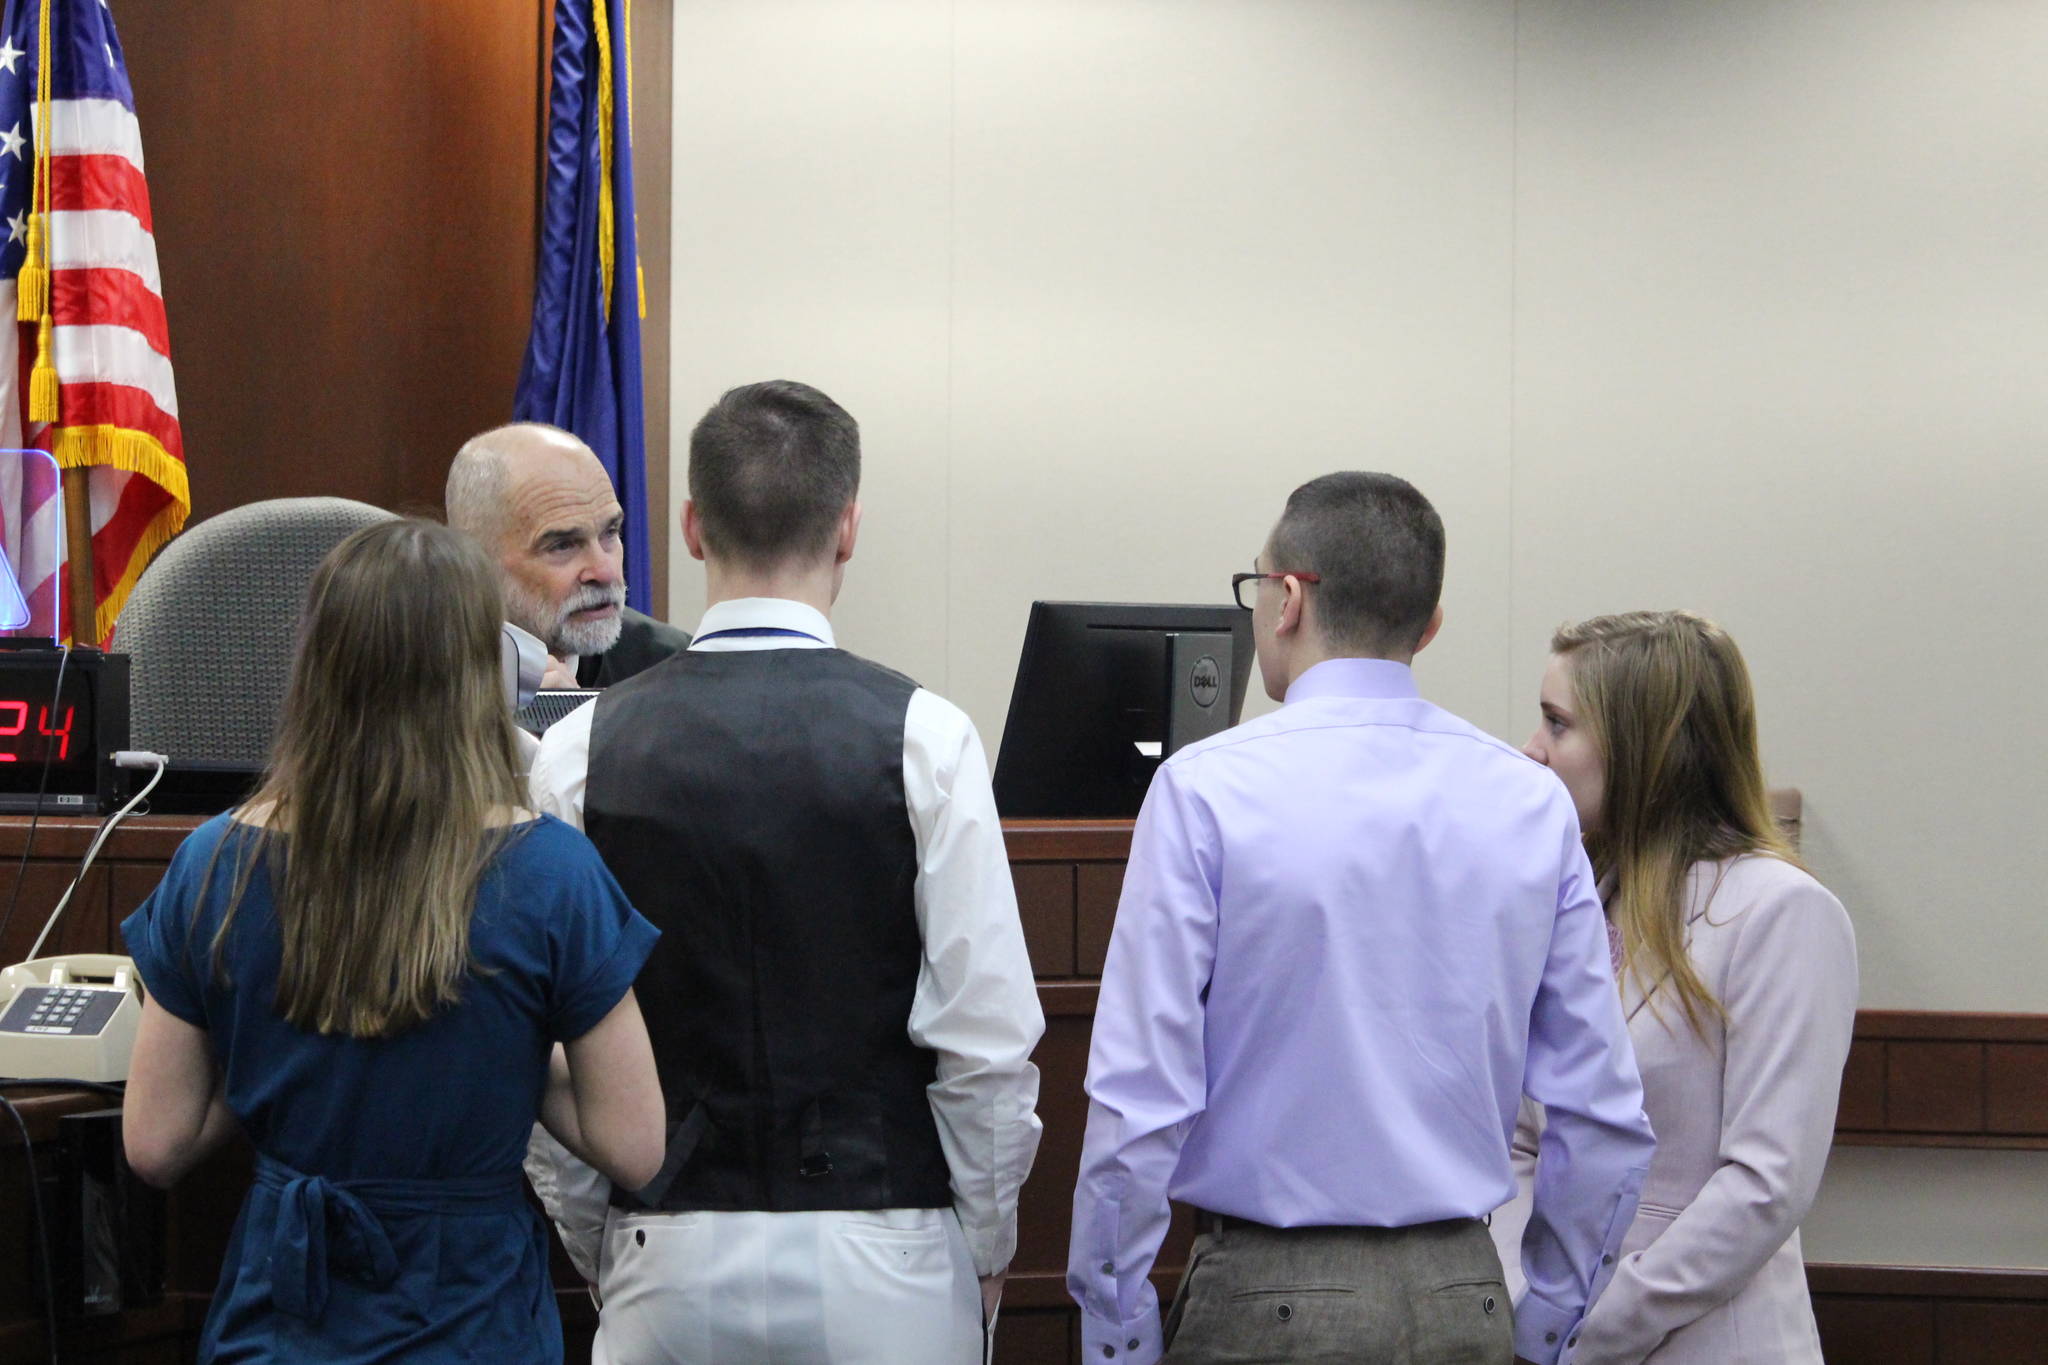 Peter Ehrhardt in his role as the judge counsels the defense attorneys and prosecutors during a mock trial at the Kenai Courthouse on Dec. 3, 2019. (Photo by Brian Mazurek/Peninsula Clarion)